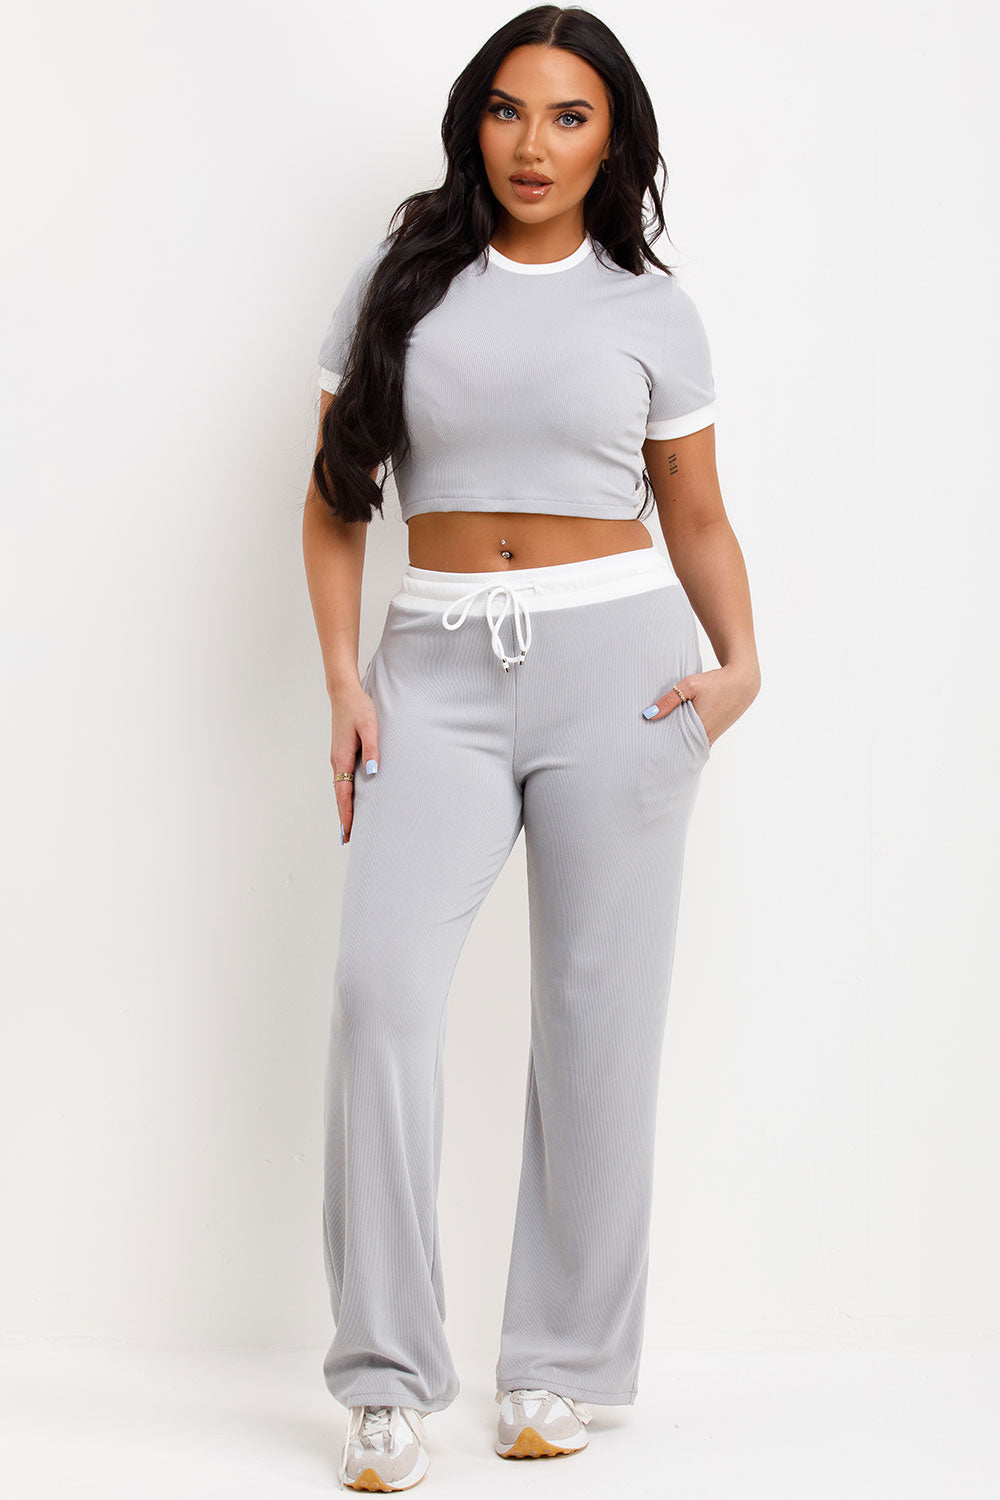 ribbed trousers and top co ord loungewear set